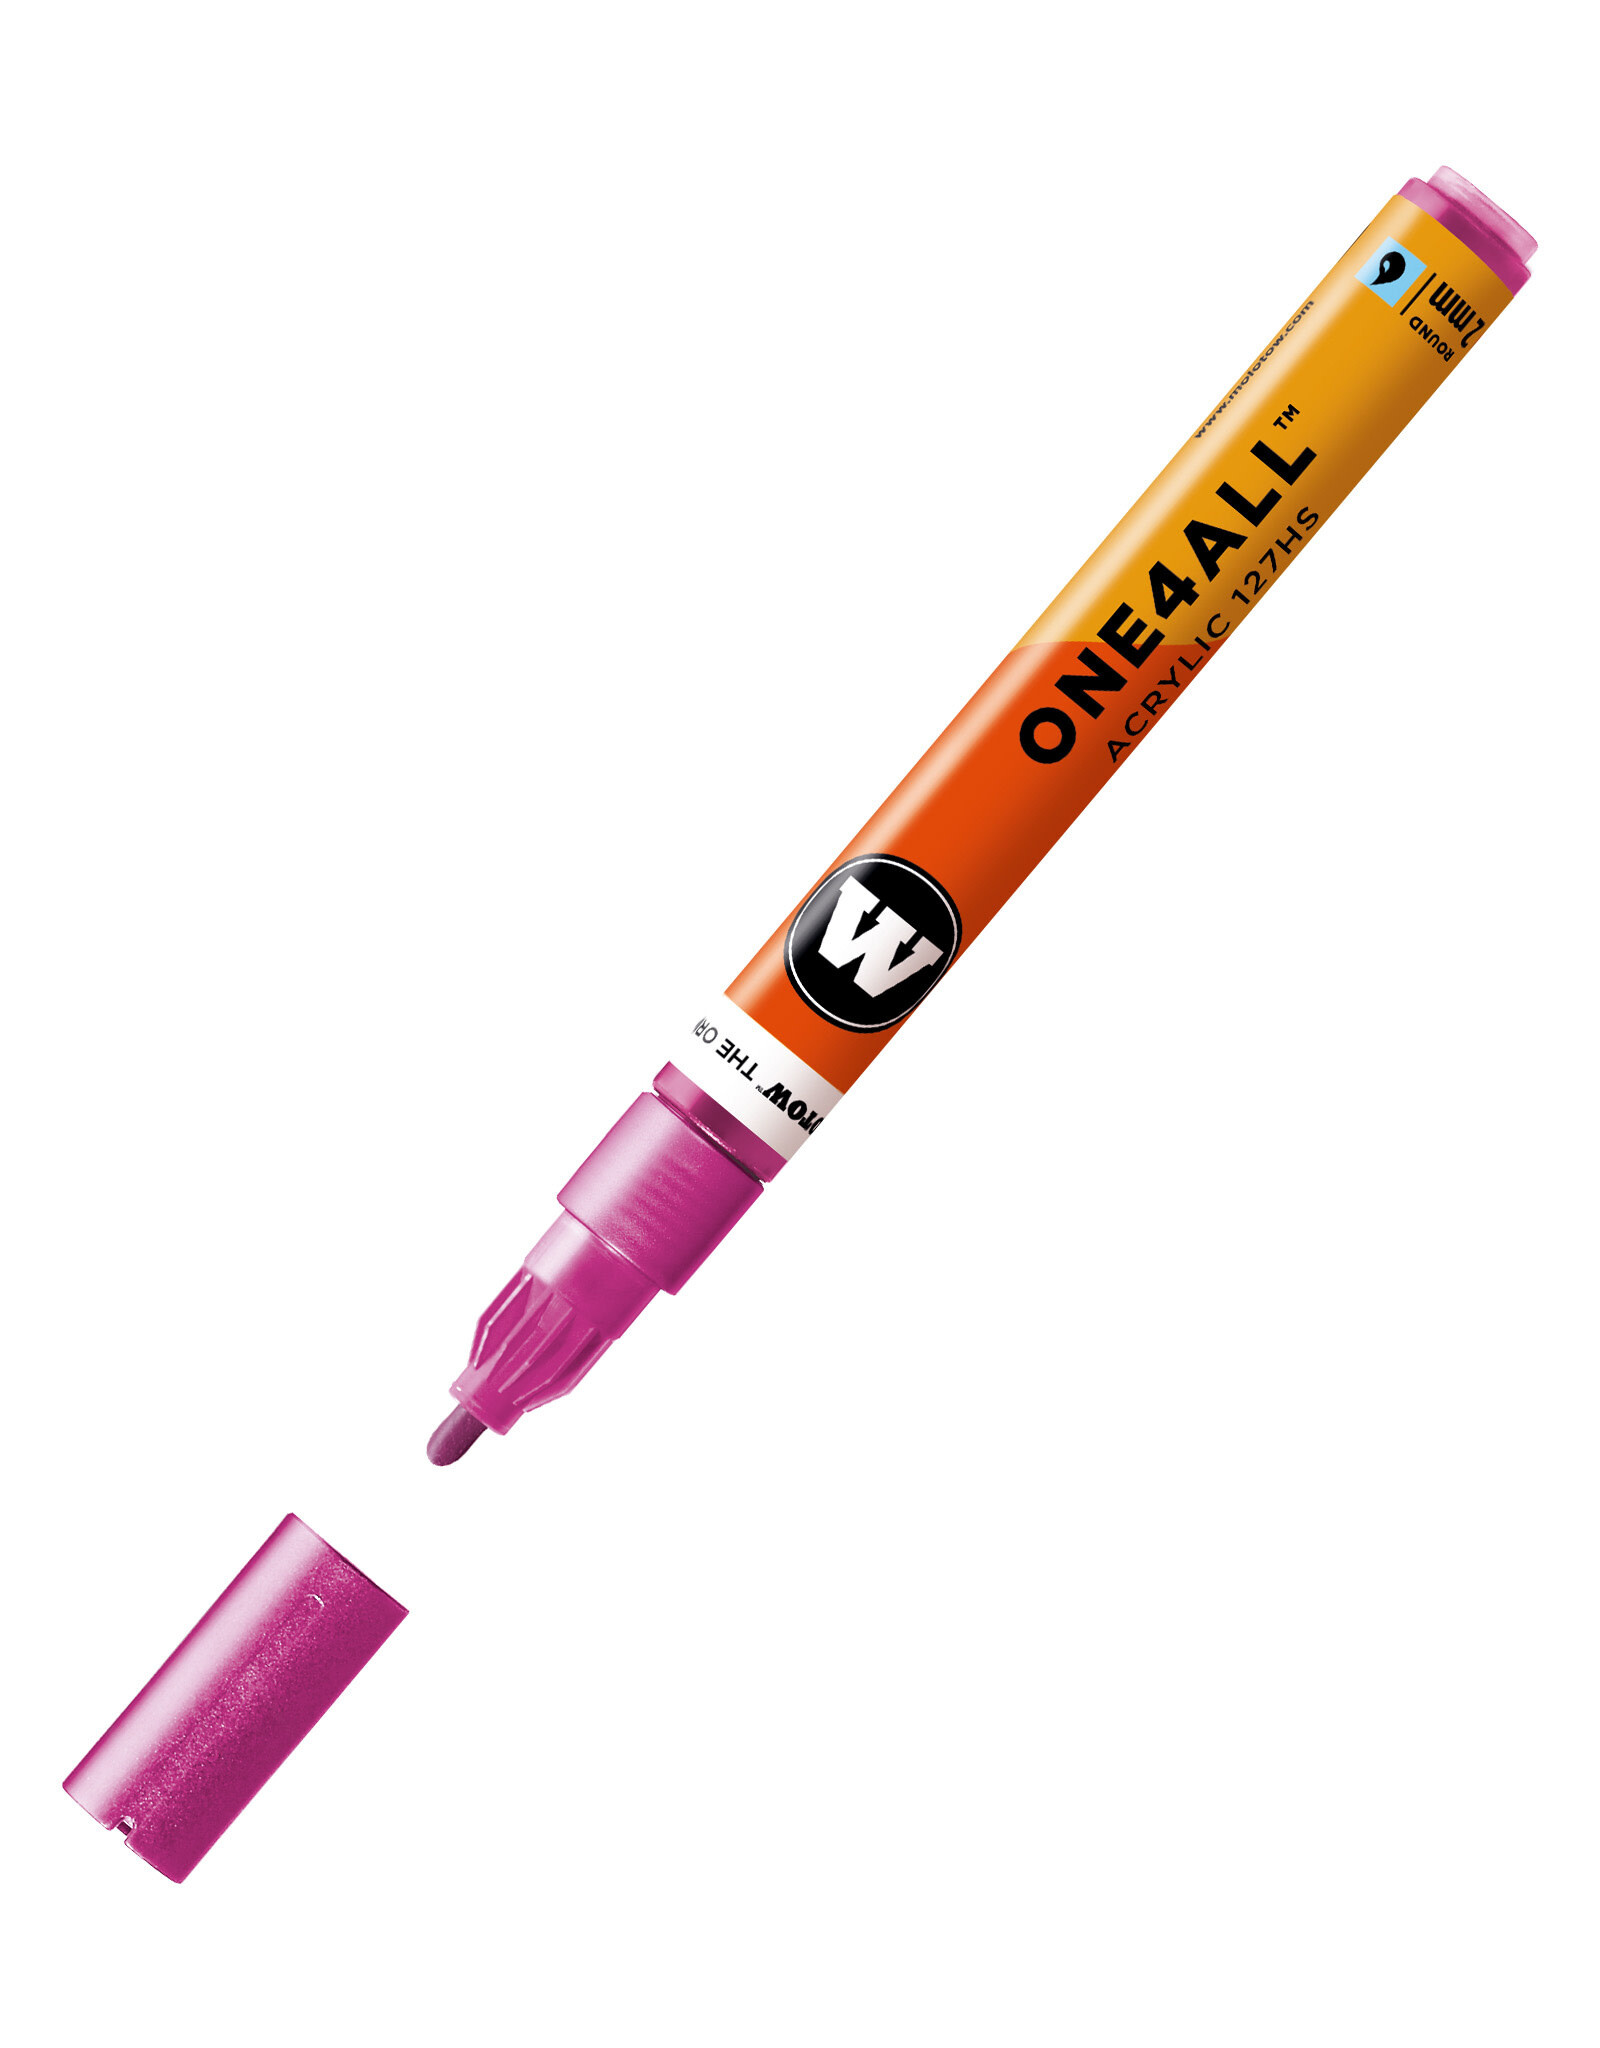 CLEARANCE Molotow ONE4ALL Paint Marker, Metallic Pink 2mm